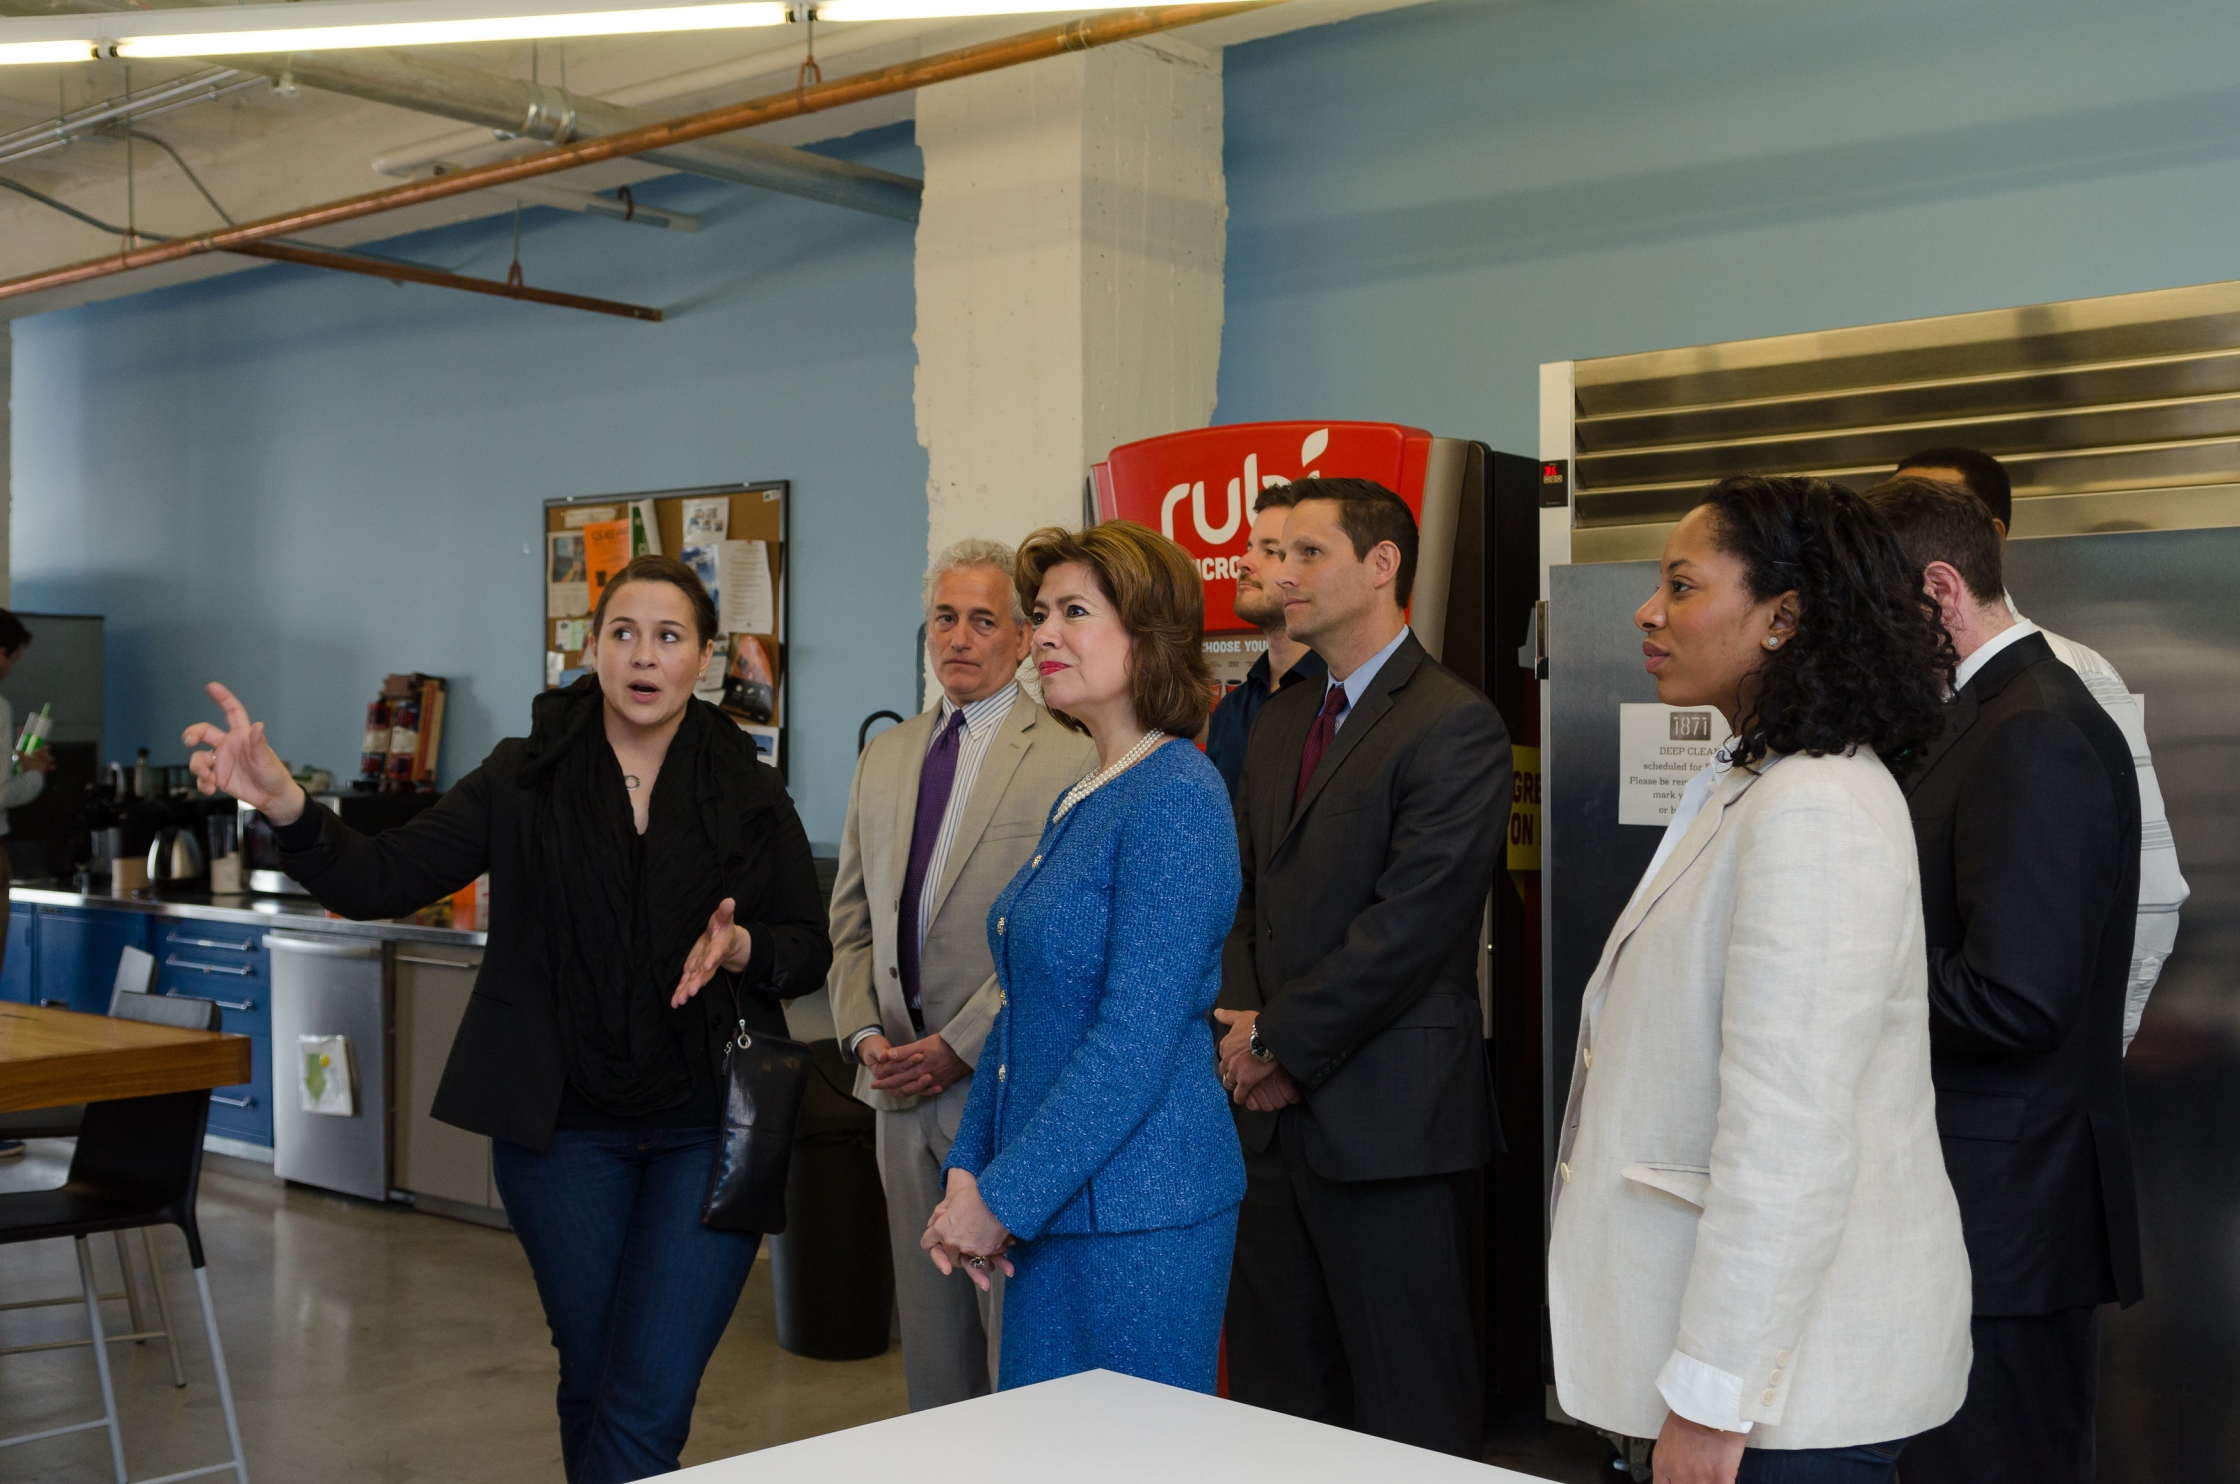 MCS Entrepreneurs: "SBA Administrator Maria Contreras-Sweet with entrepreneurs in April 2015 in Chicago, a Startup in a Day city. (Photo Credit: SBA)"